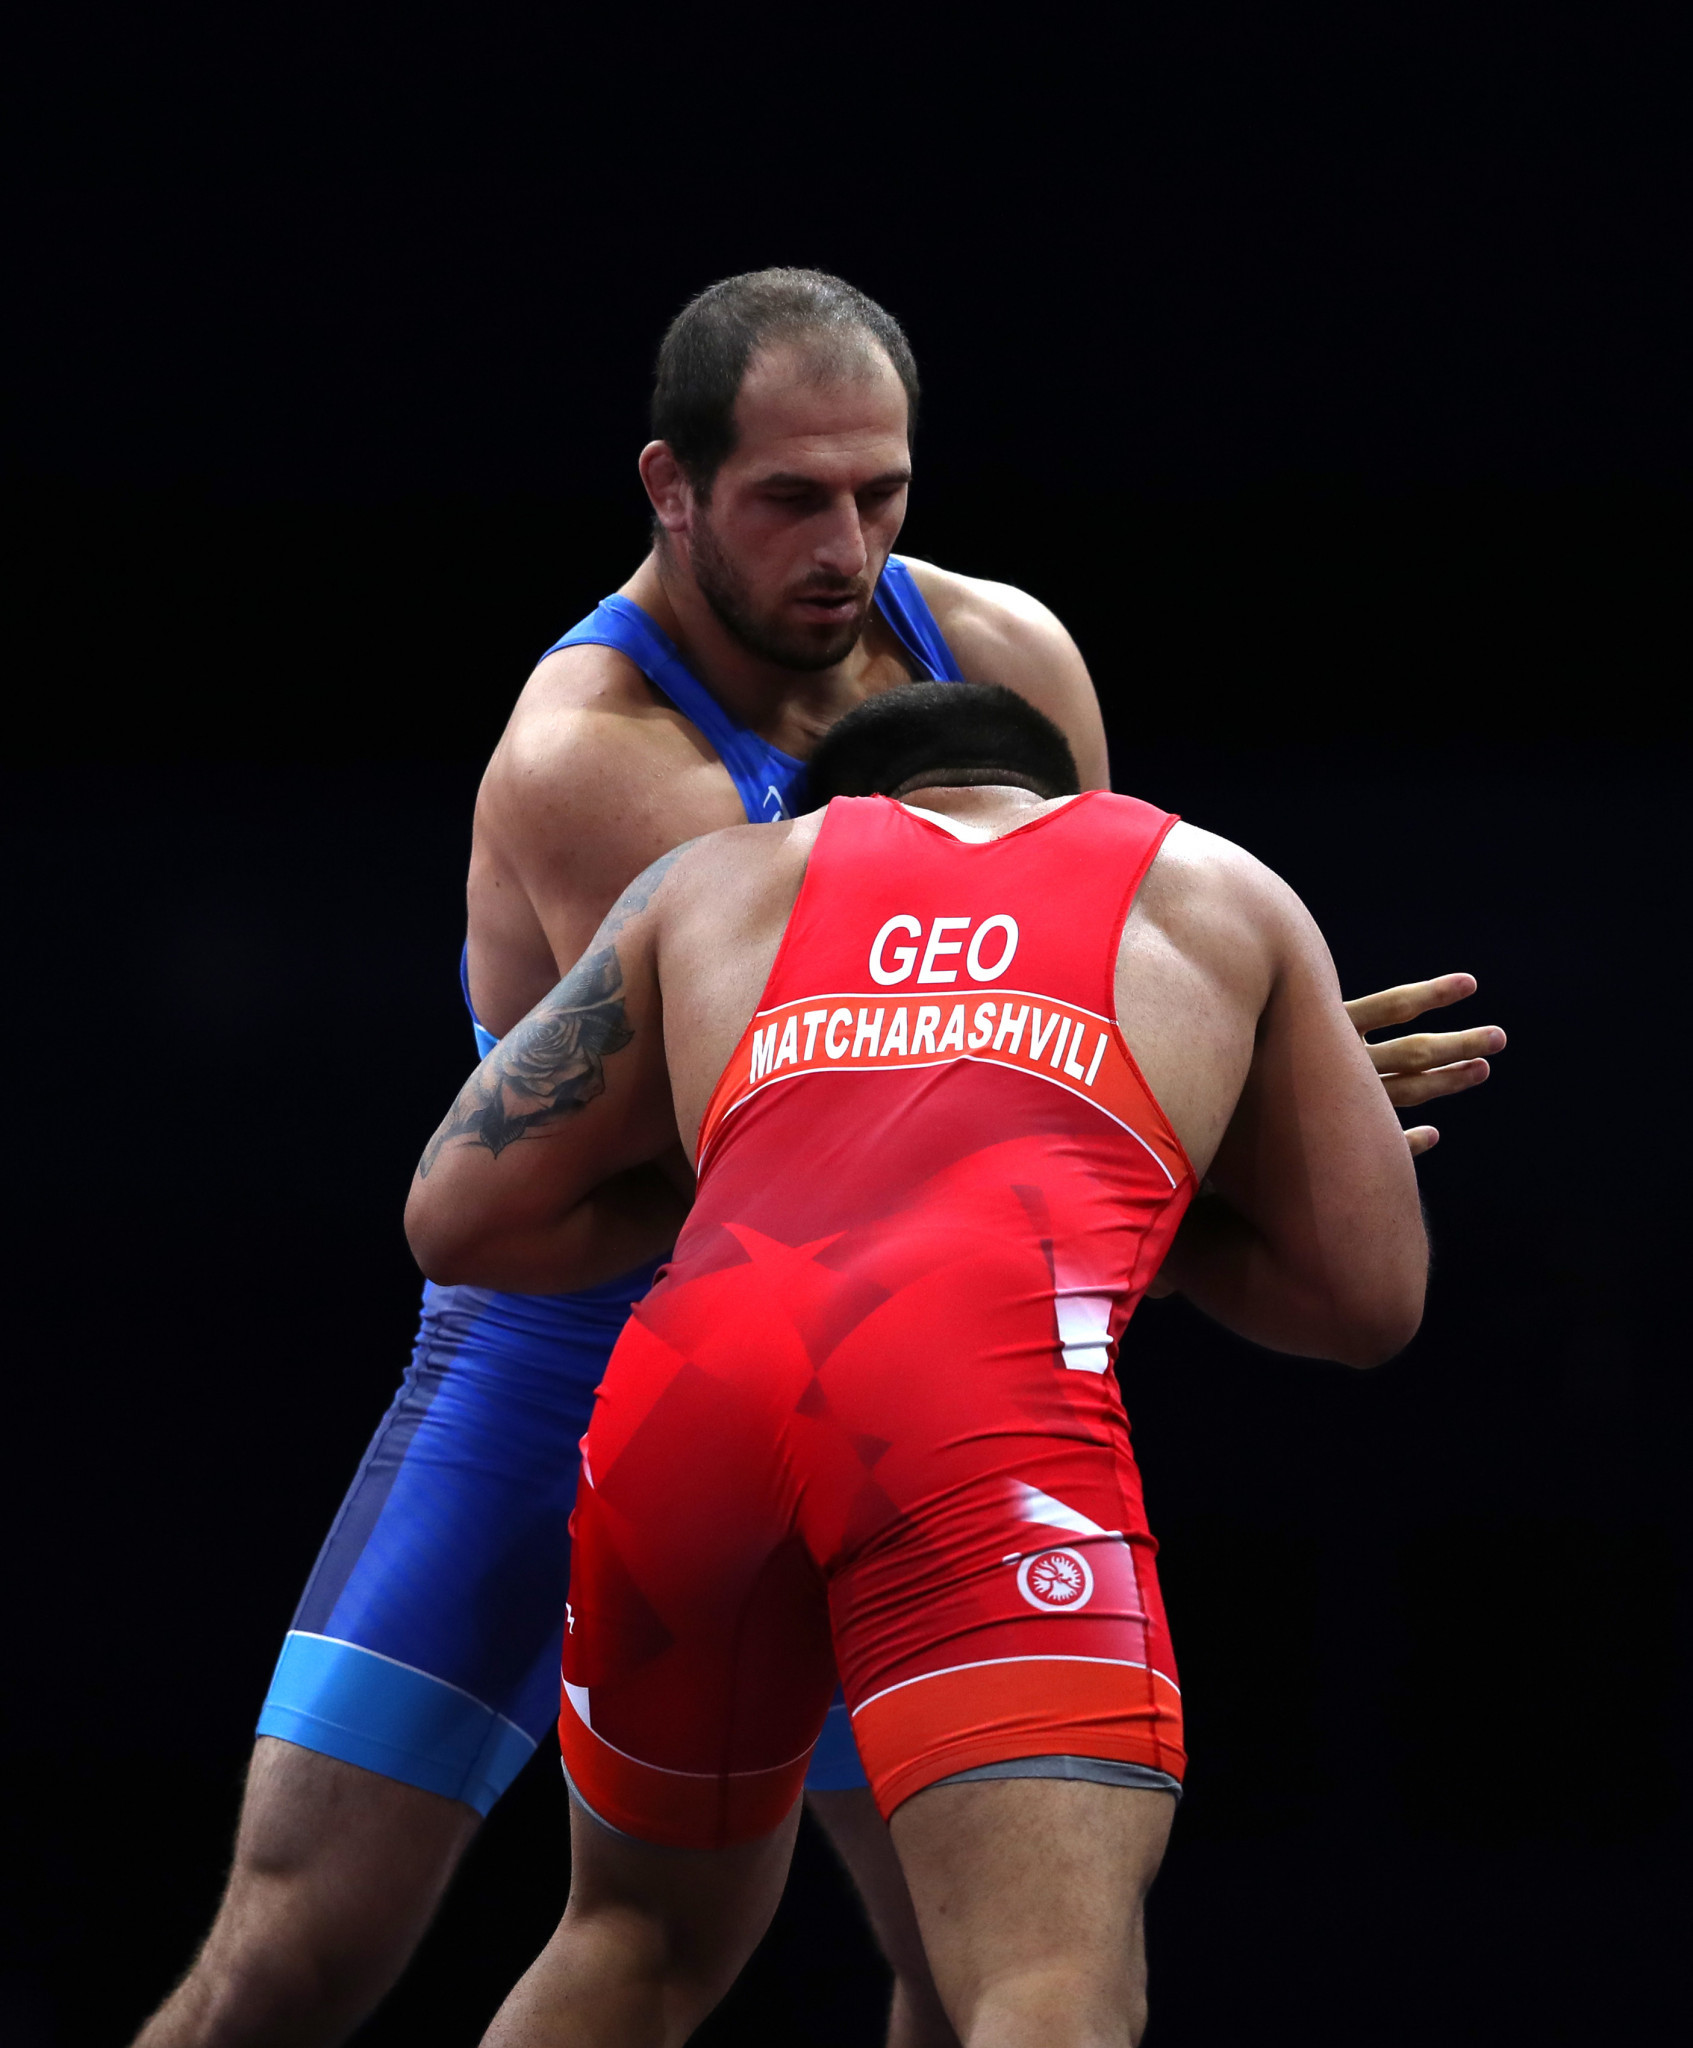 Khizniev earns men’s 125kg title as Russia win three golds from four in opening medal night of men’s freestyle wrestling at Minsk 2019